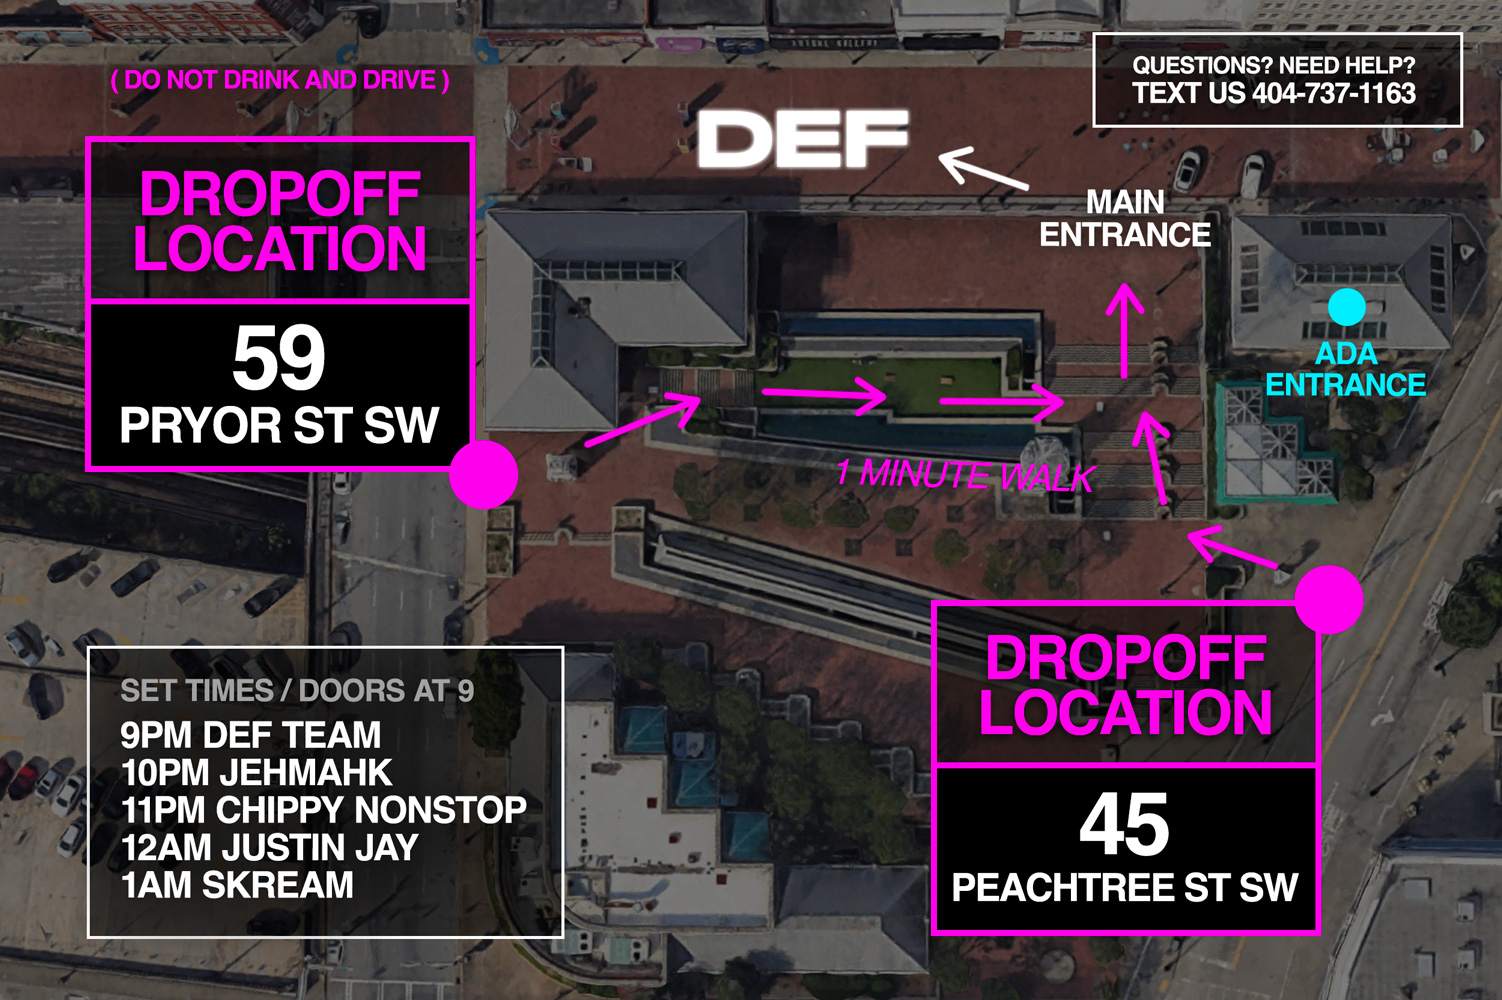 DEF with Skream, Justin Jay, Chippy Nonstop, JehMahk (SOLD OUT) - Página trasera